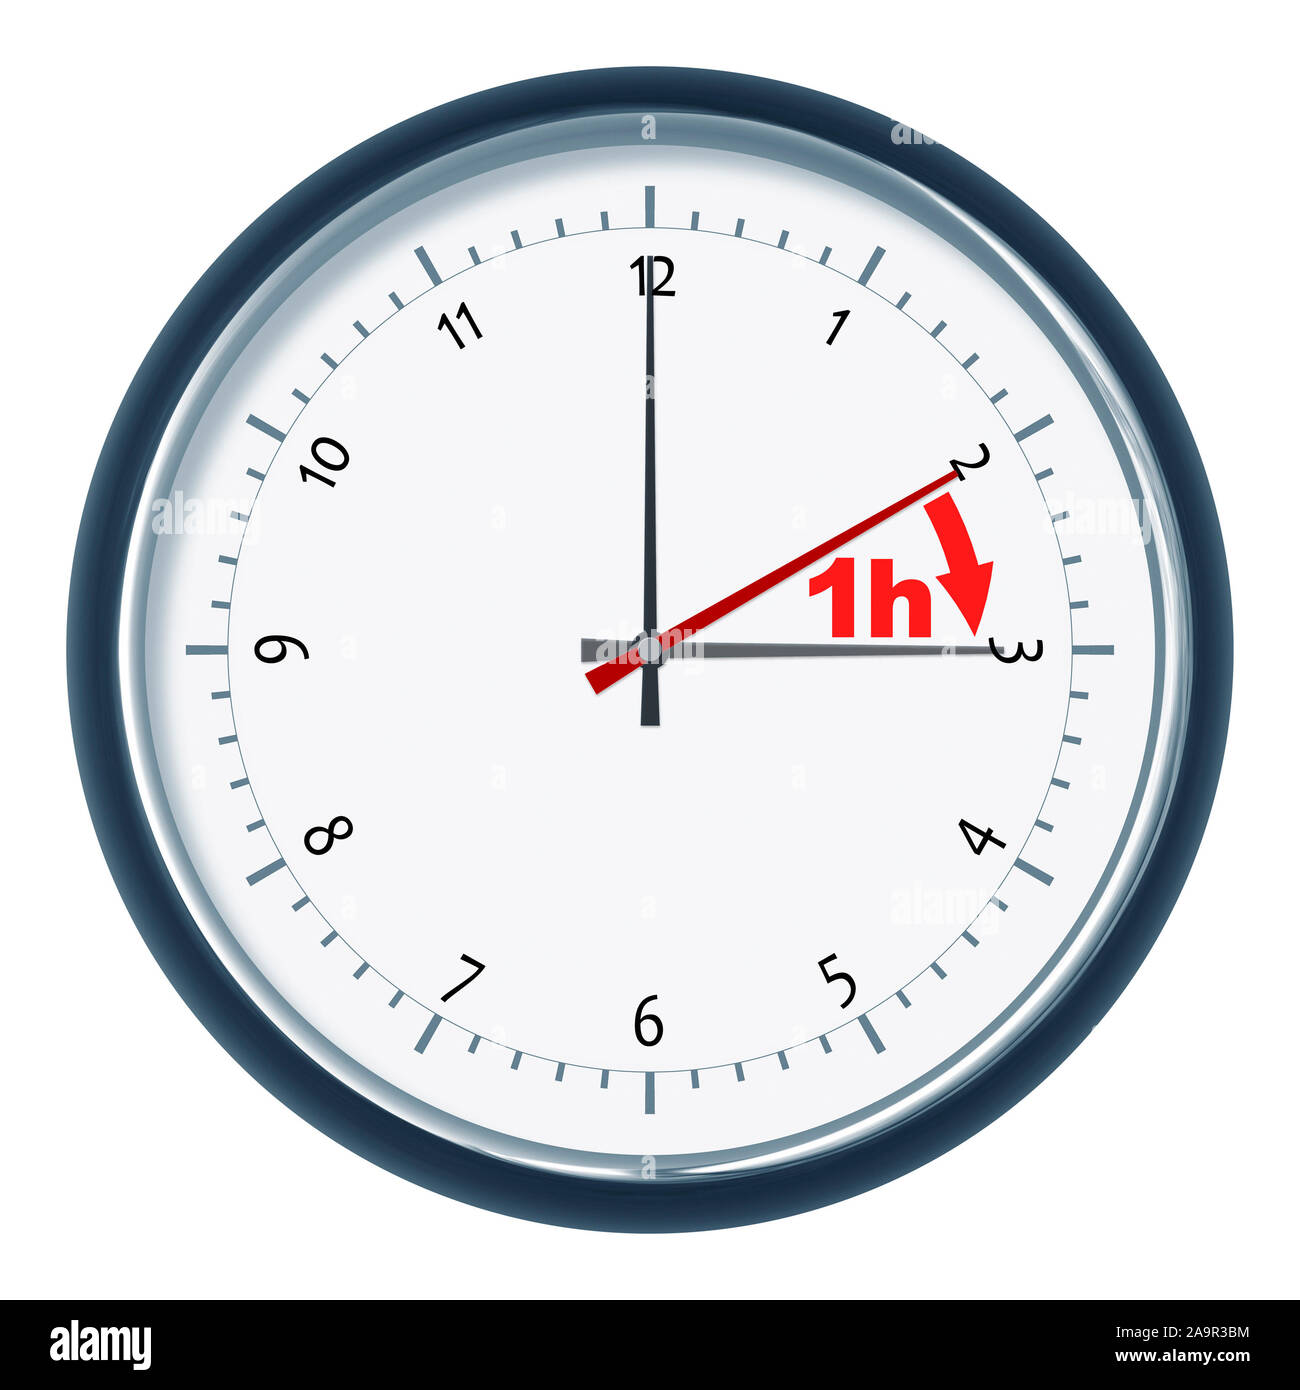 Daylight saving europe Cut Out Stock Images & Pictures - Alamy